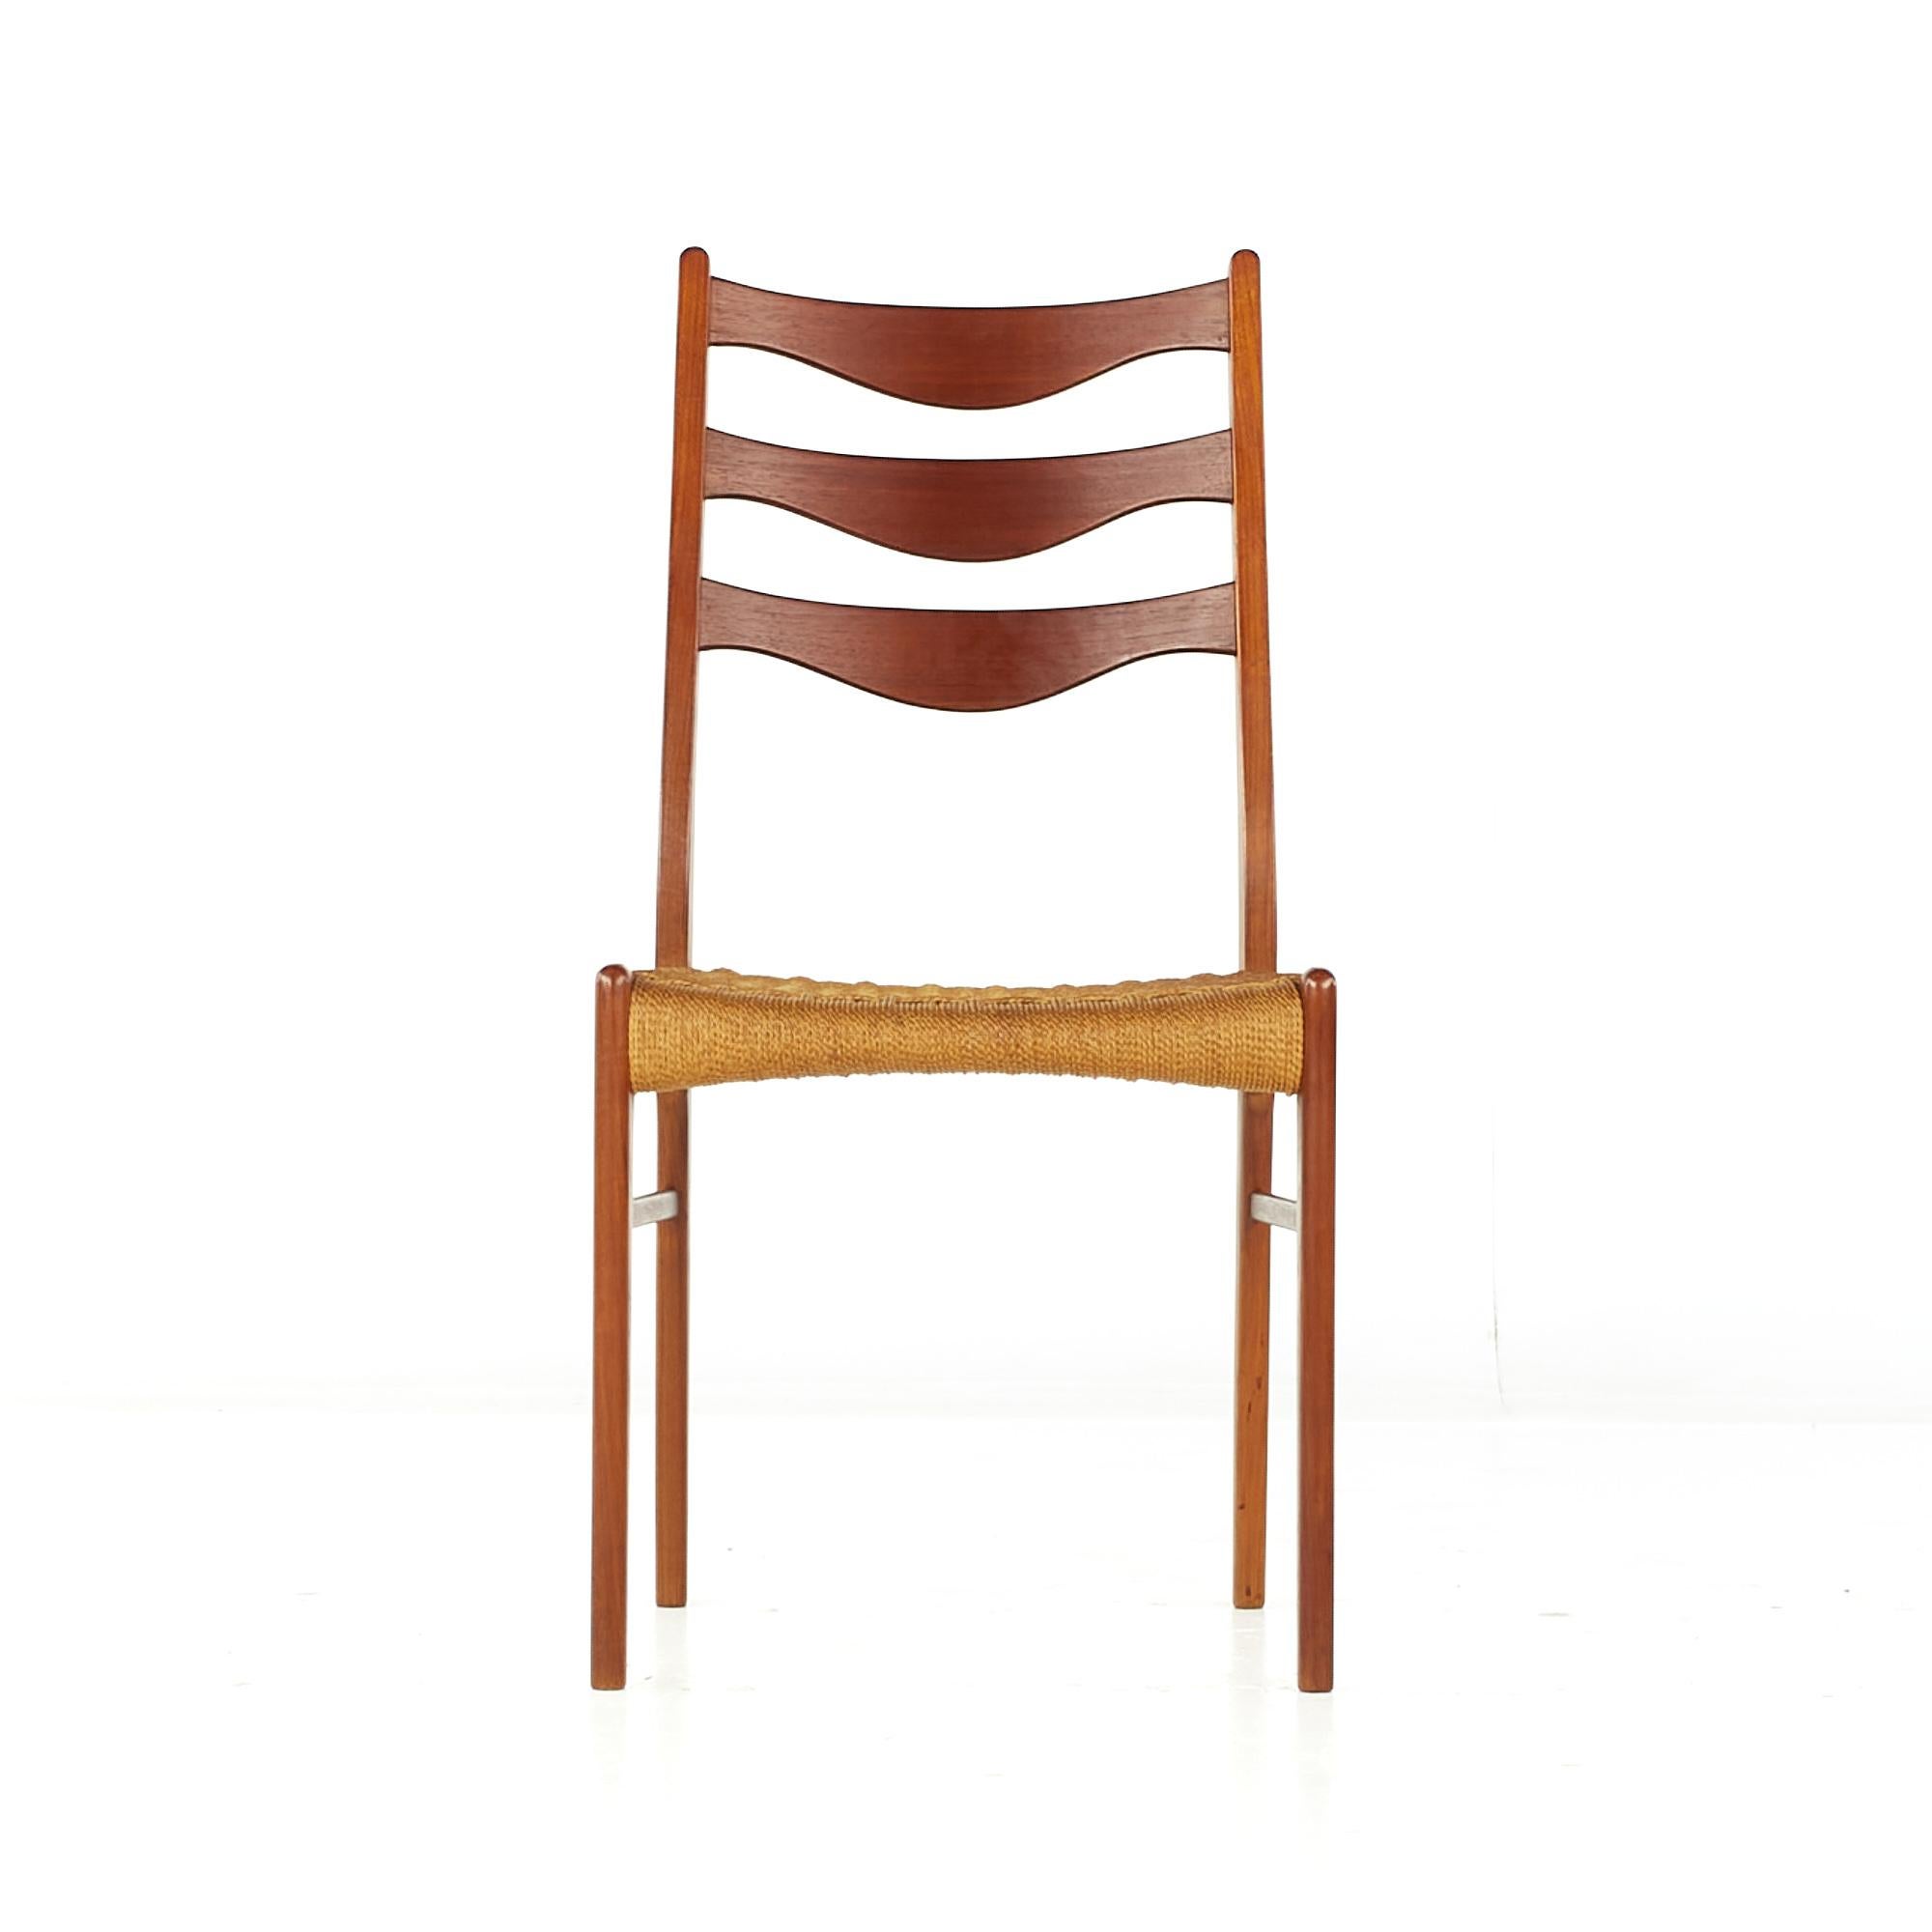 Late 20th Century Arne Wahl Iversen GS90 MCM Danish Teak Dining Chairs with Rope Seats, Set of 6 For Sale